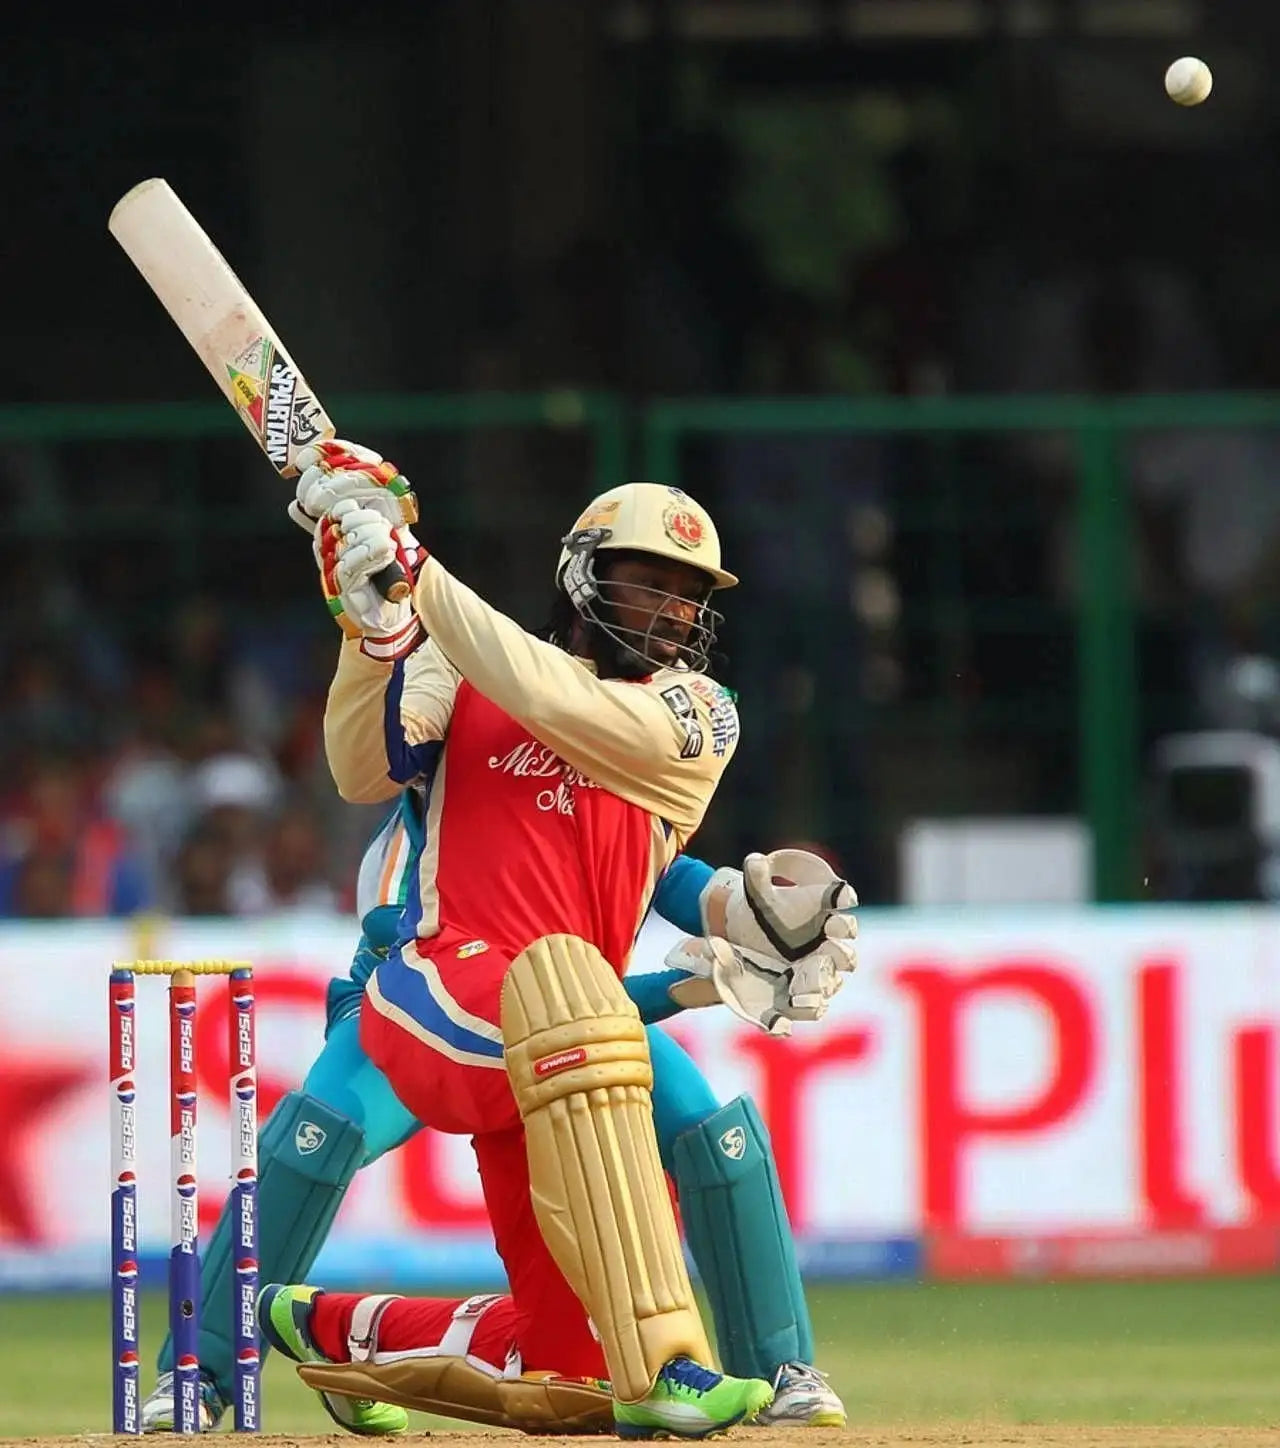 Chris Gayle batting when he scored the fastest century in the IPL